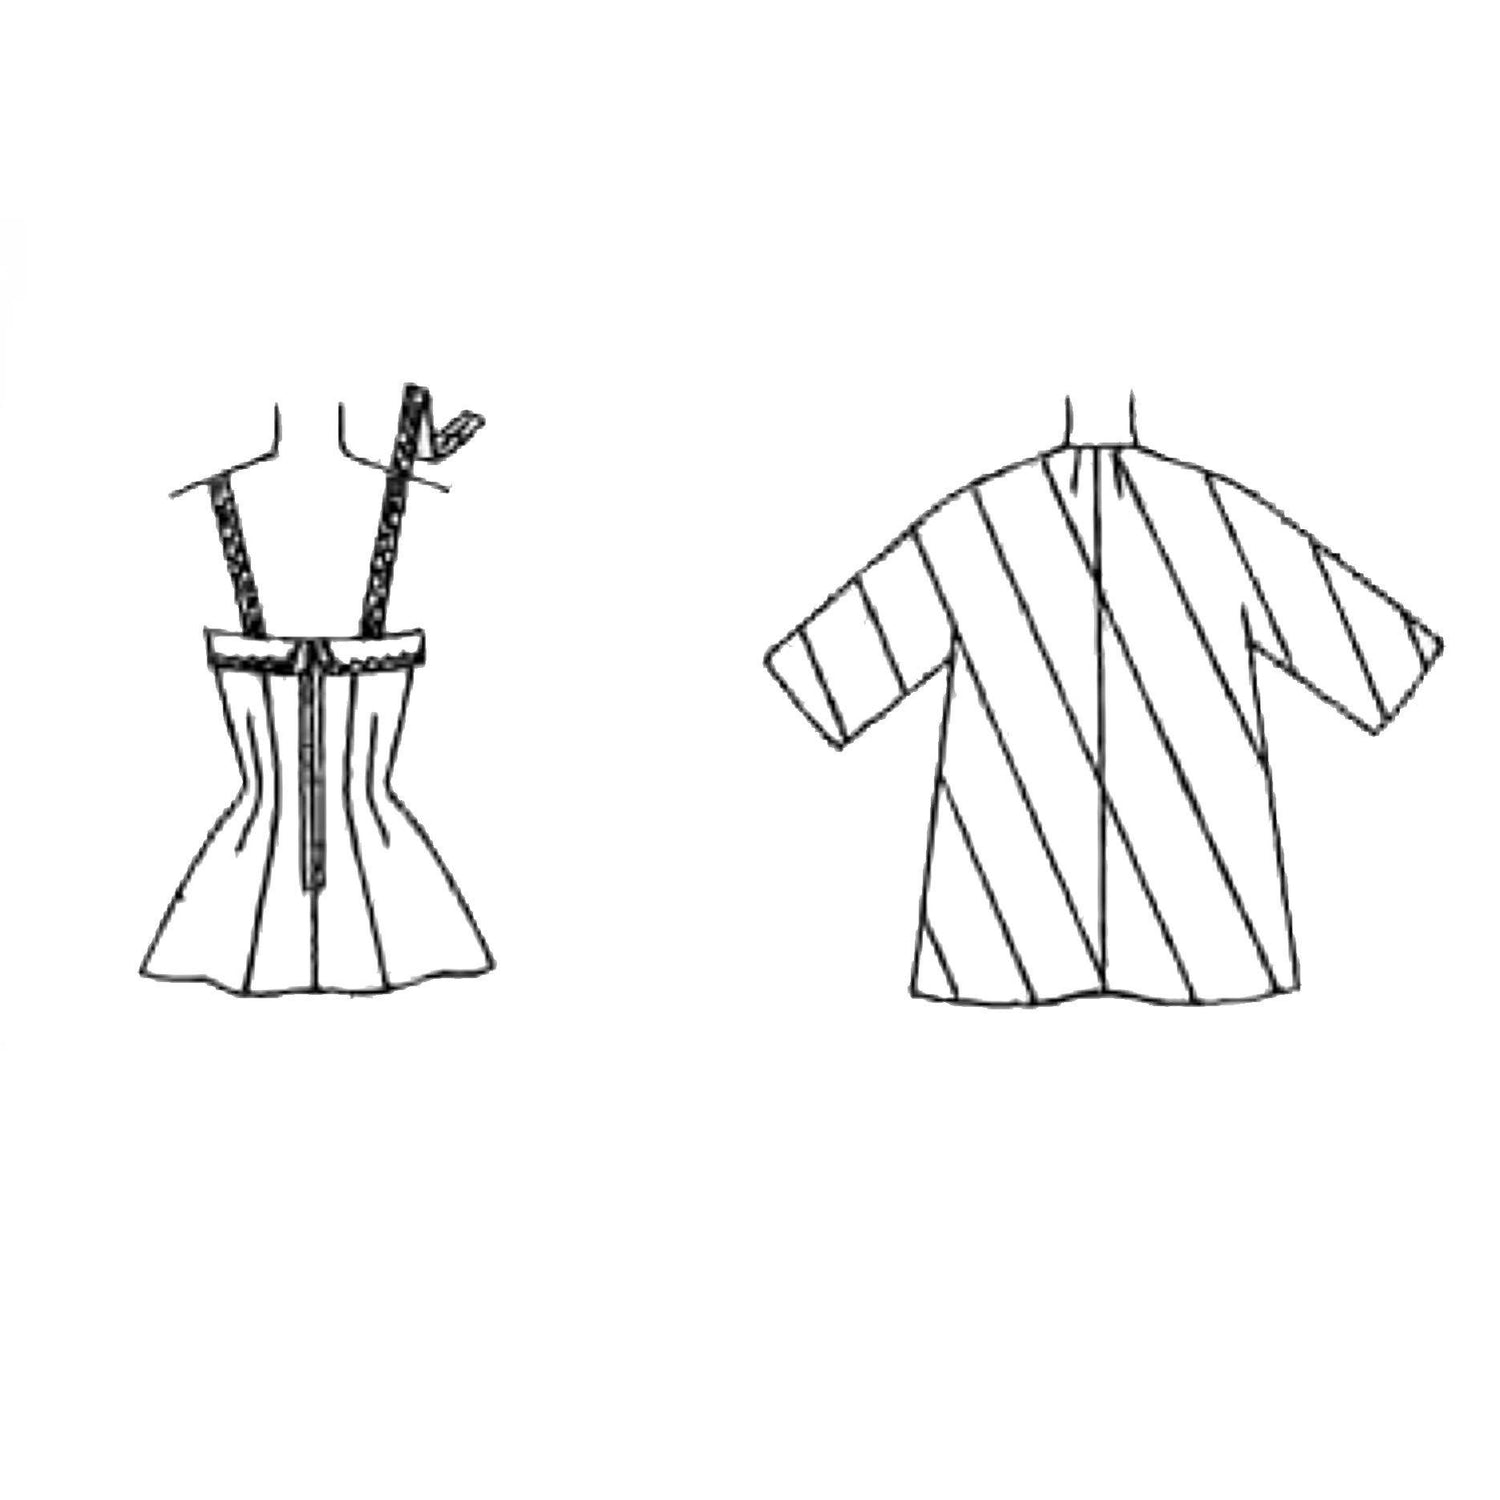 Line drawing for a beach coat